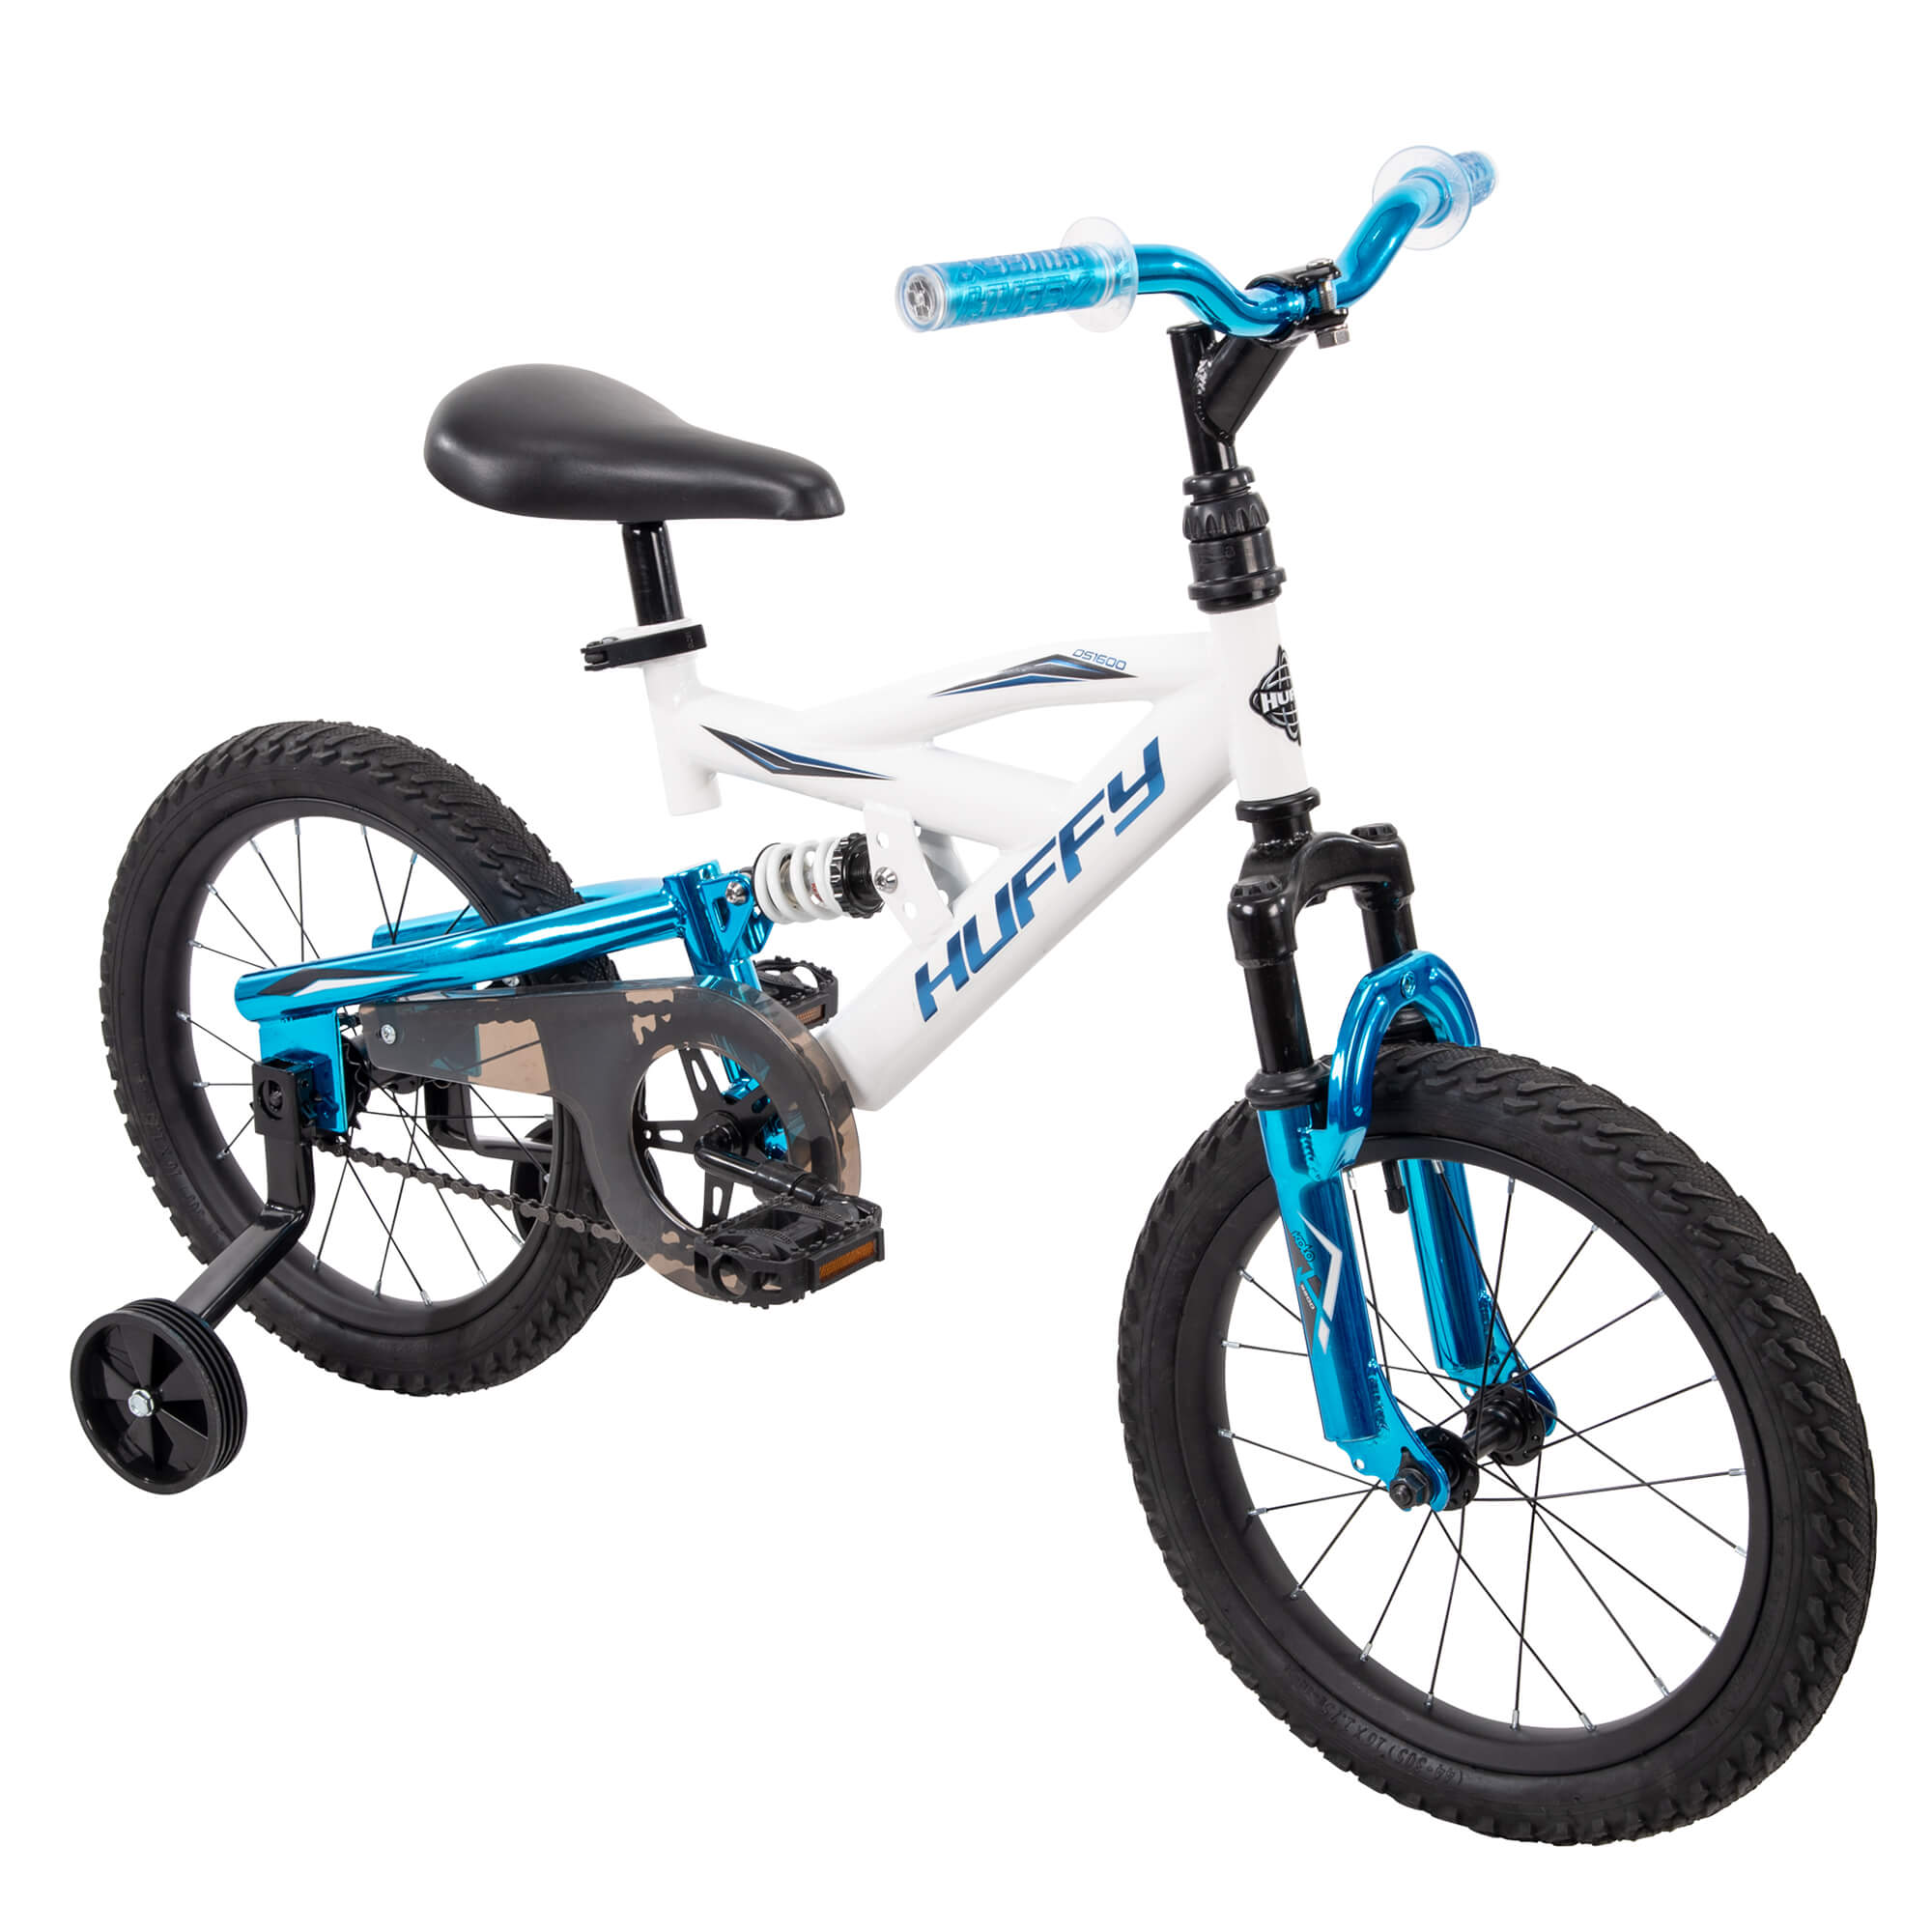 Huffy 16" DS 1600 Boys' Bike for Kids with EZ Build, White